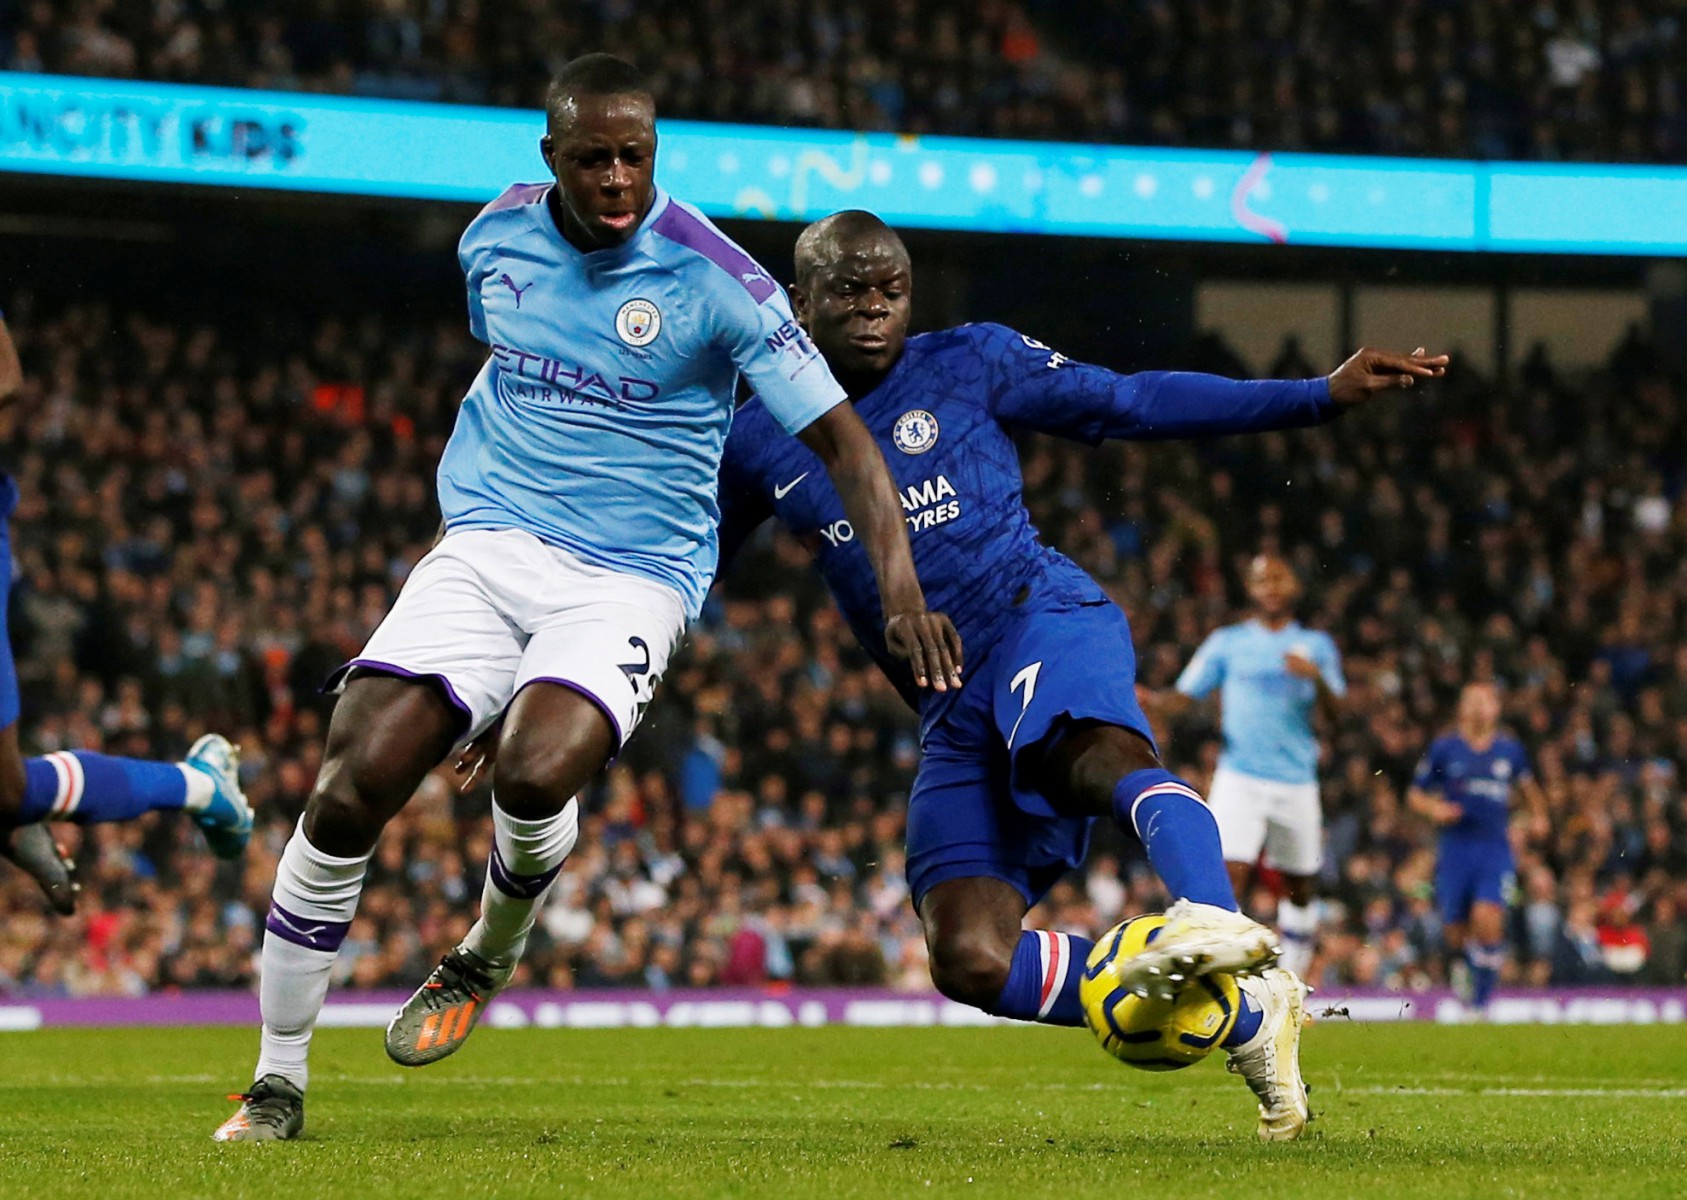 Kante scored his third goal of the season from his third shot on target as he bagged against Manchester City